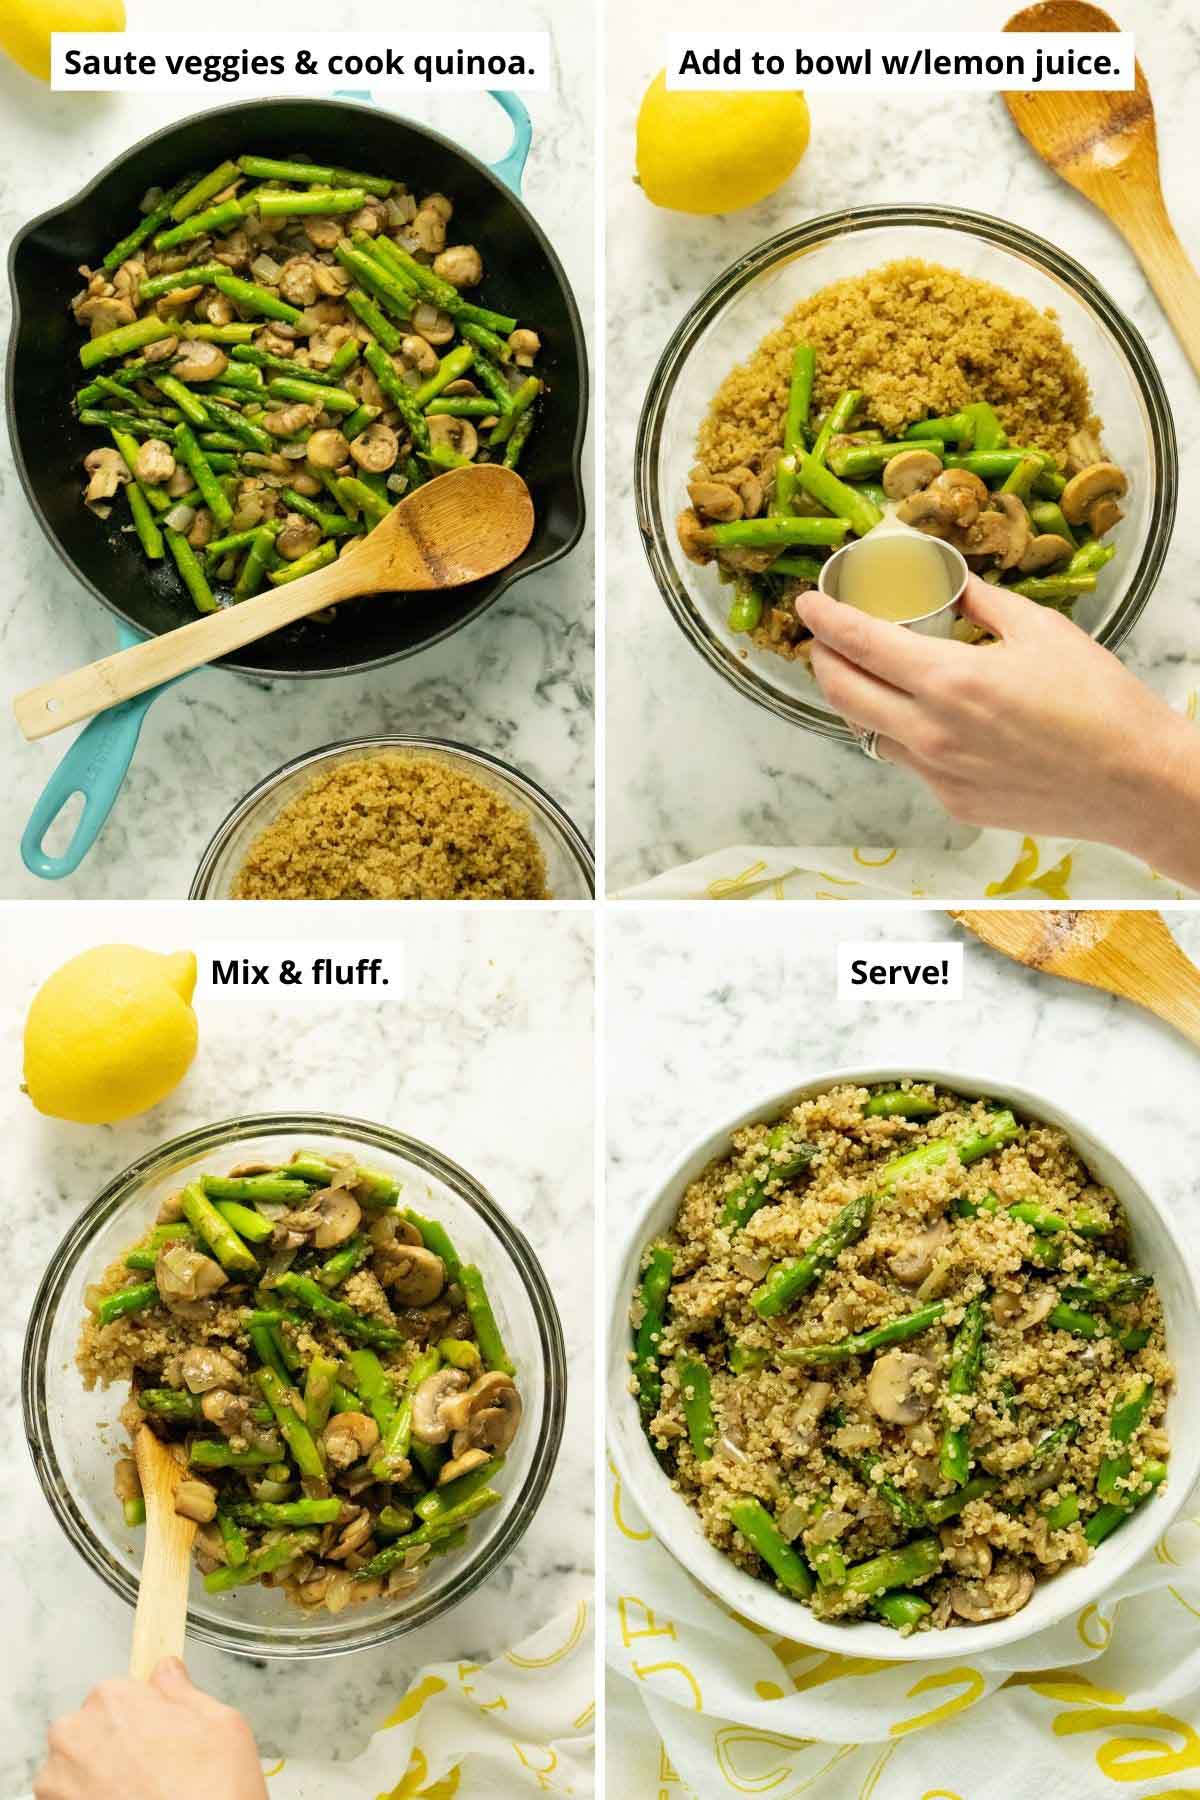 image collage showing the cooked veggies in the pan, adding lemon juice to veggies and quinoa, mixing it up, and the finished dish in a serving bowl